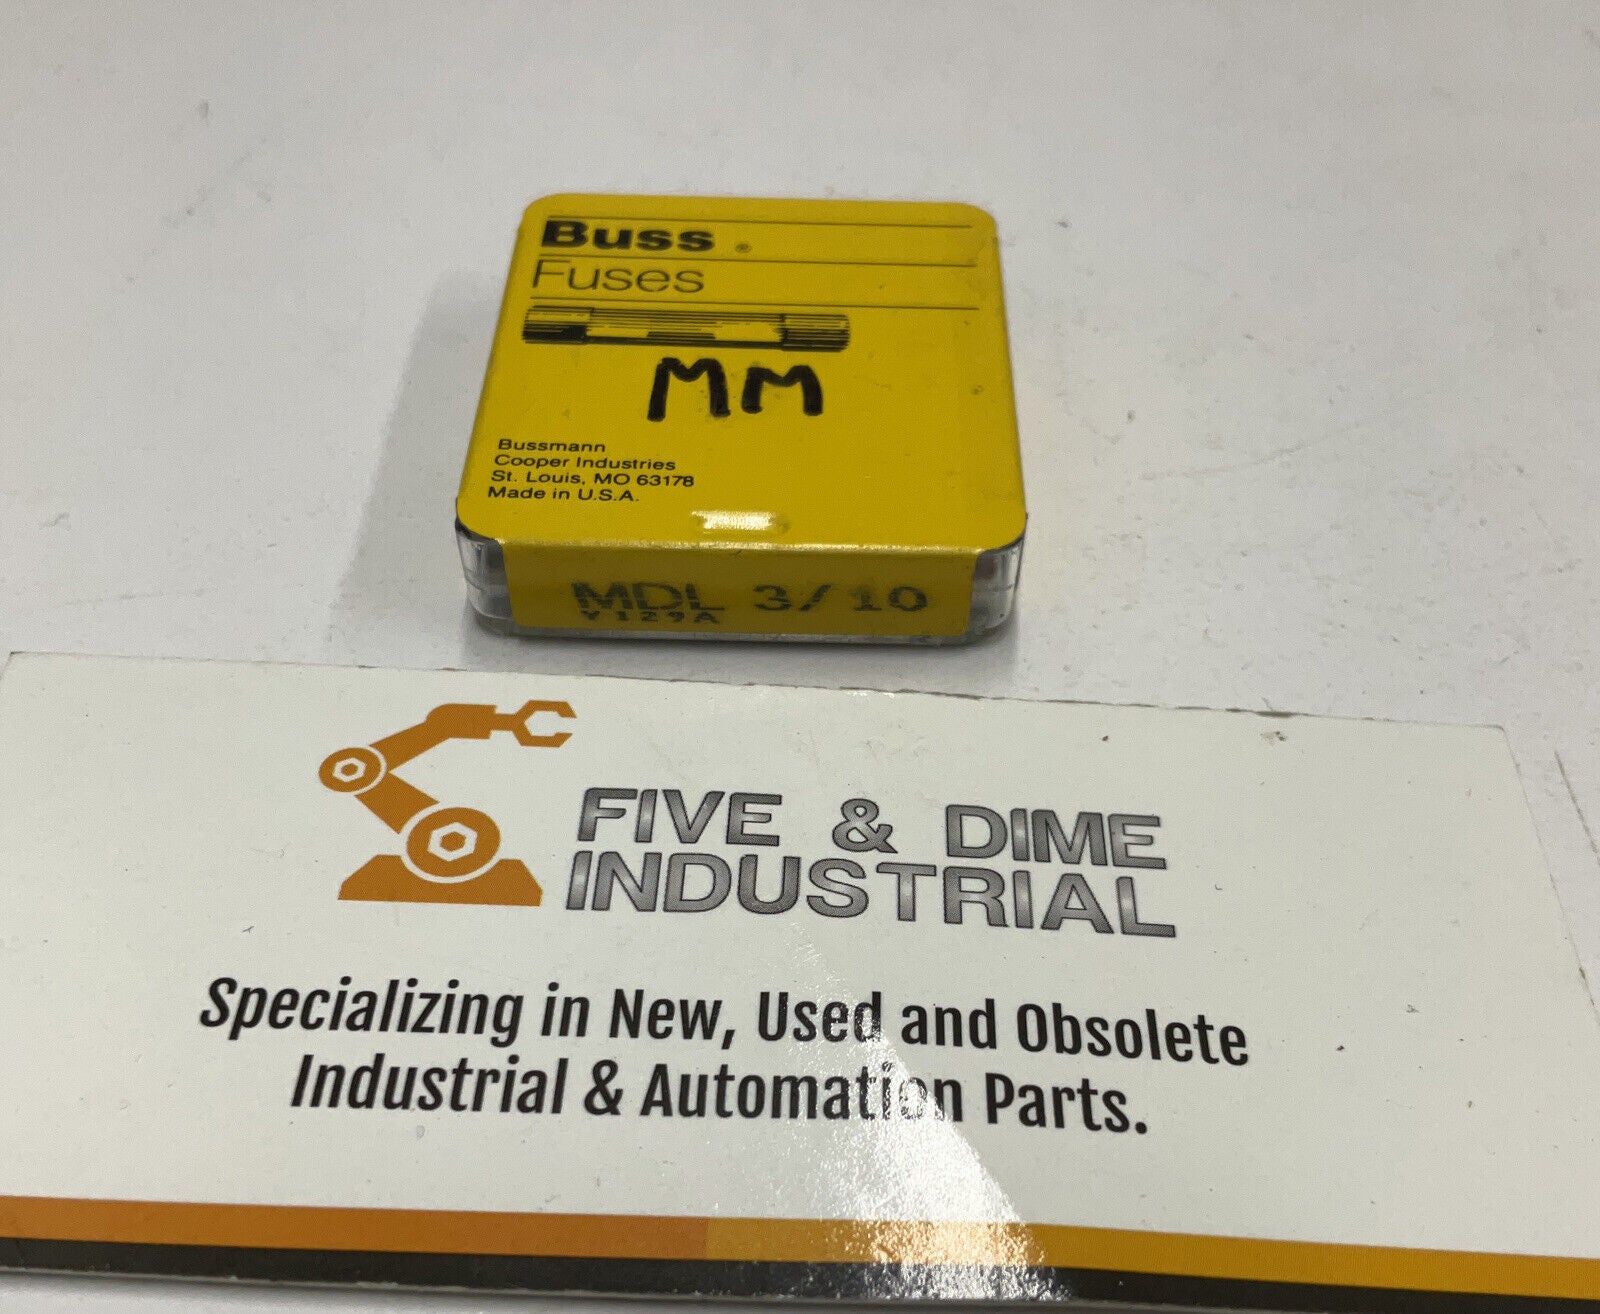 Buss Bussmann MDL 3/10 FUSES New Box of 5 (RE130) - 0